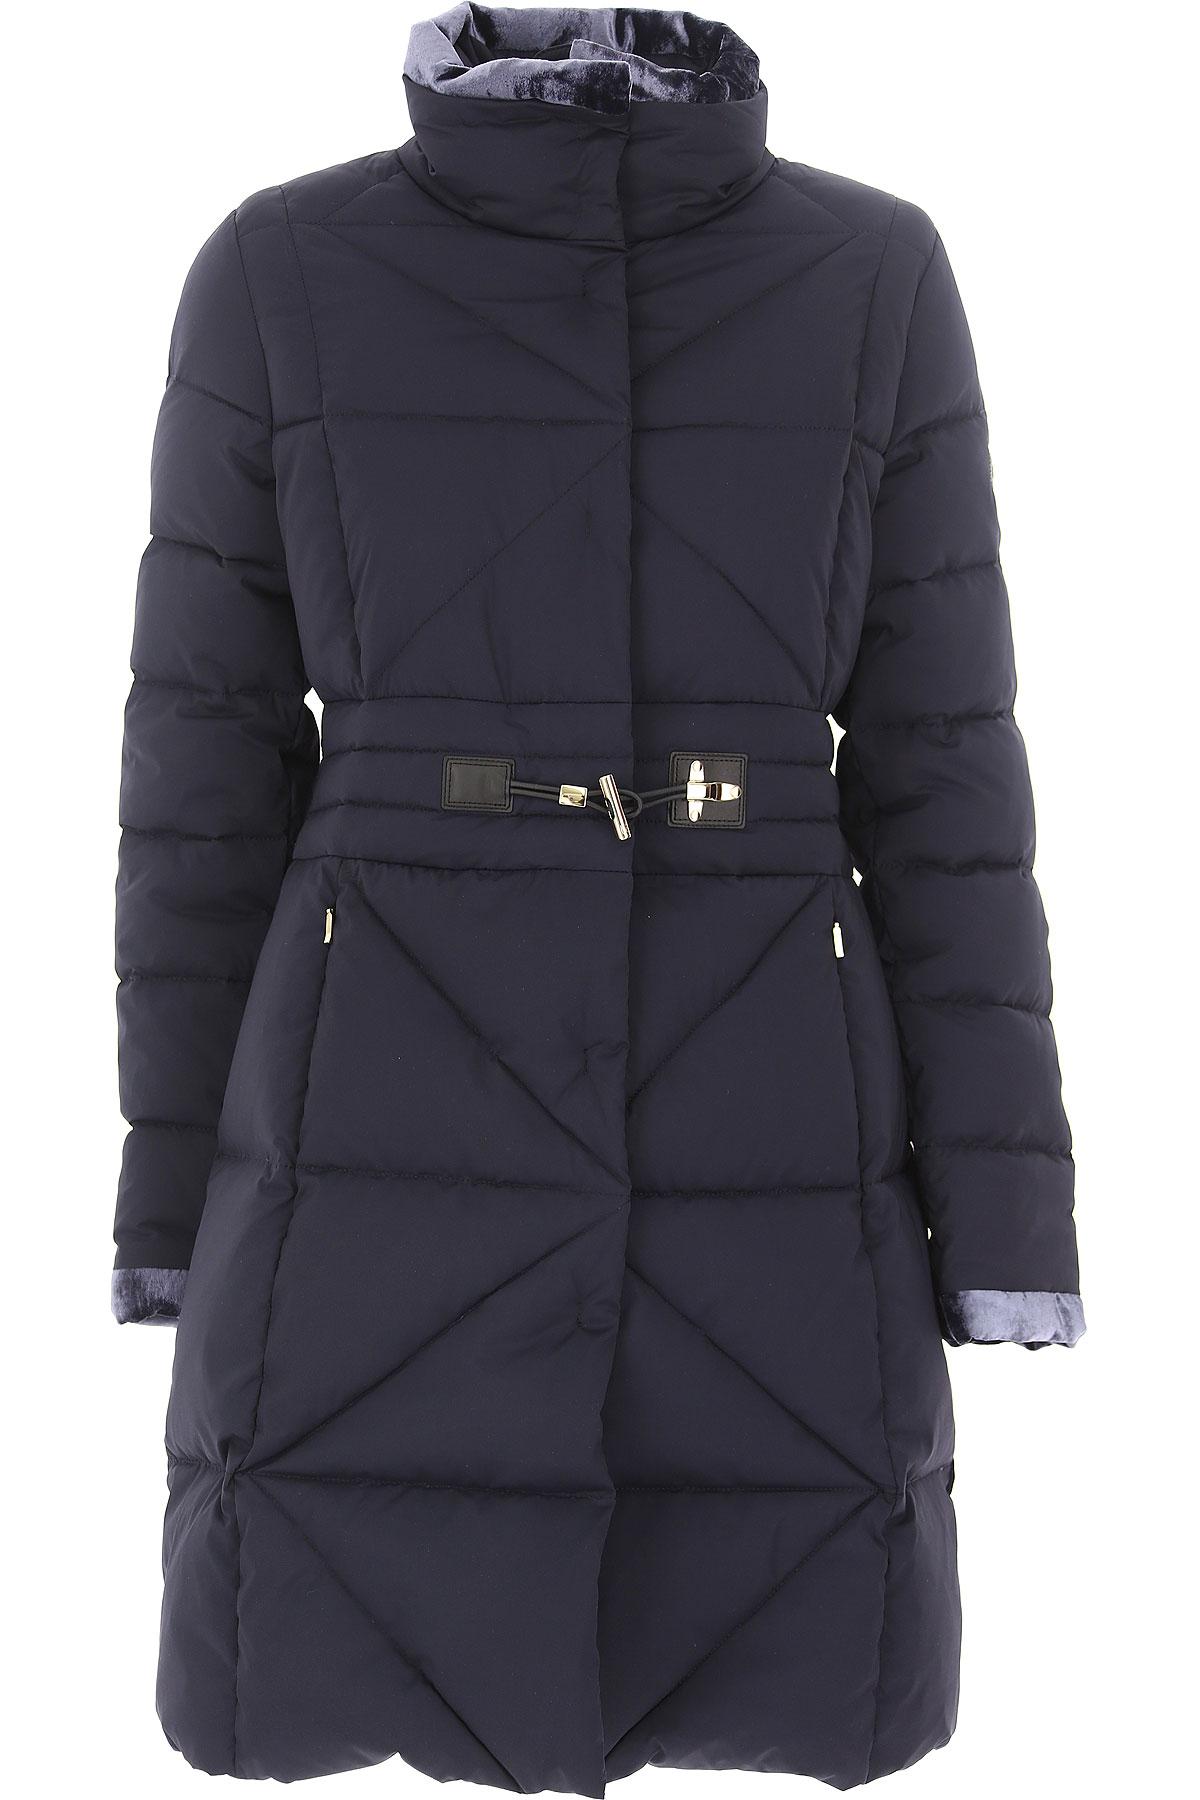 Fay Leather Down Jacket For Women in Navy Blue (Blue) - Lyst